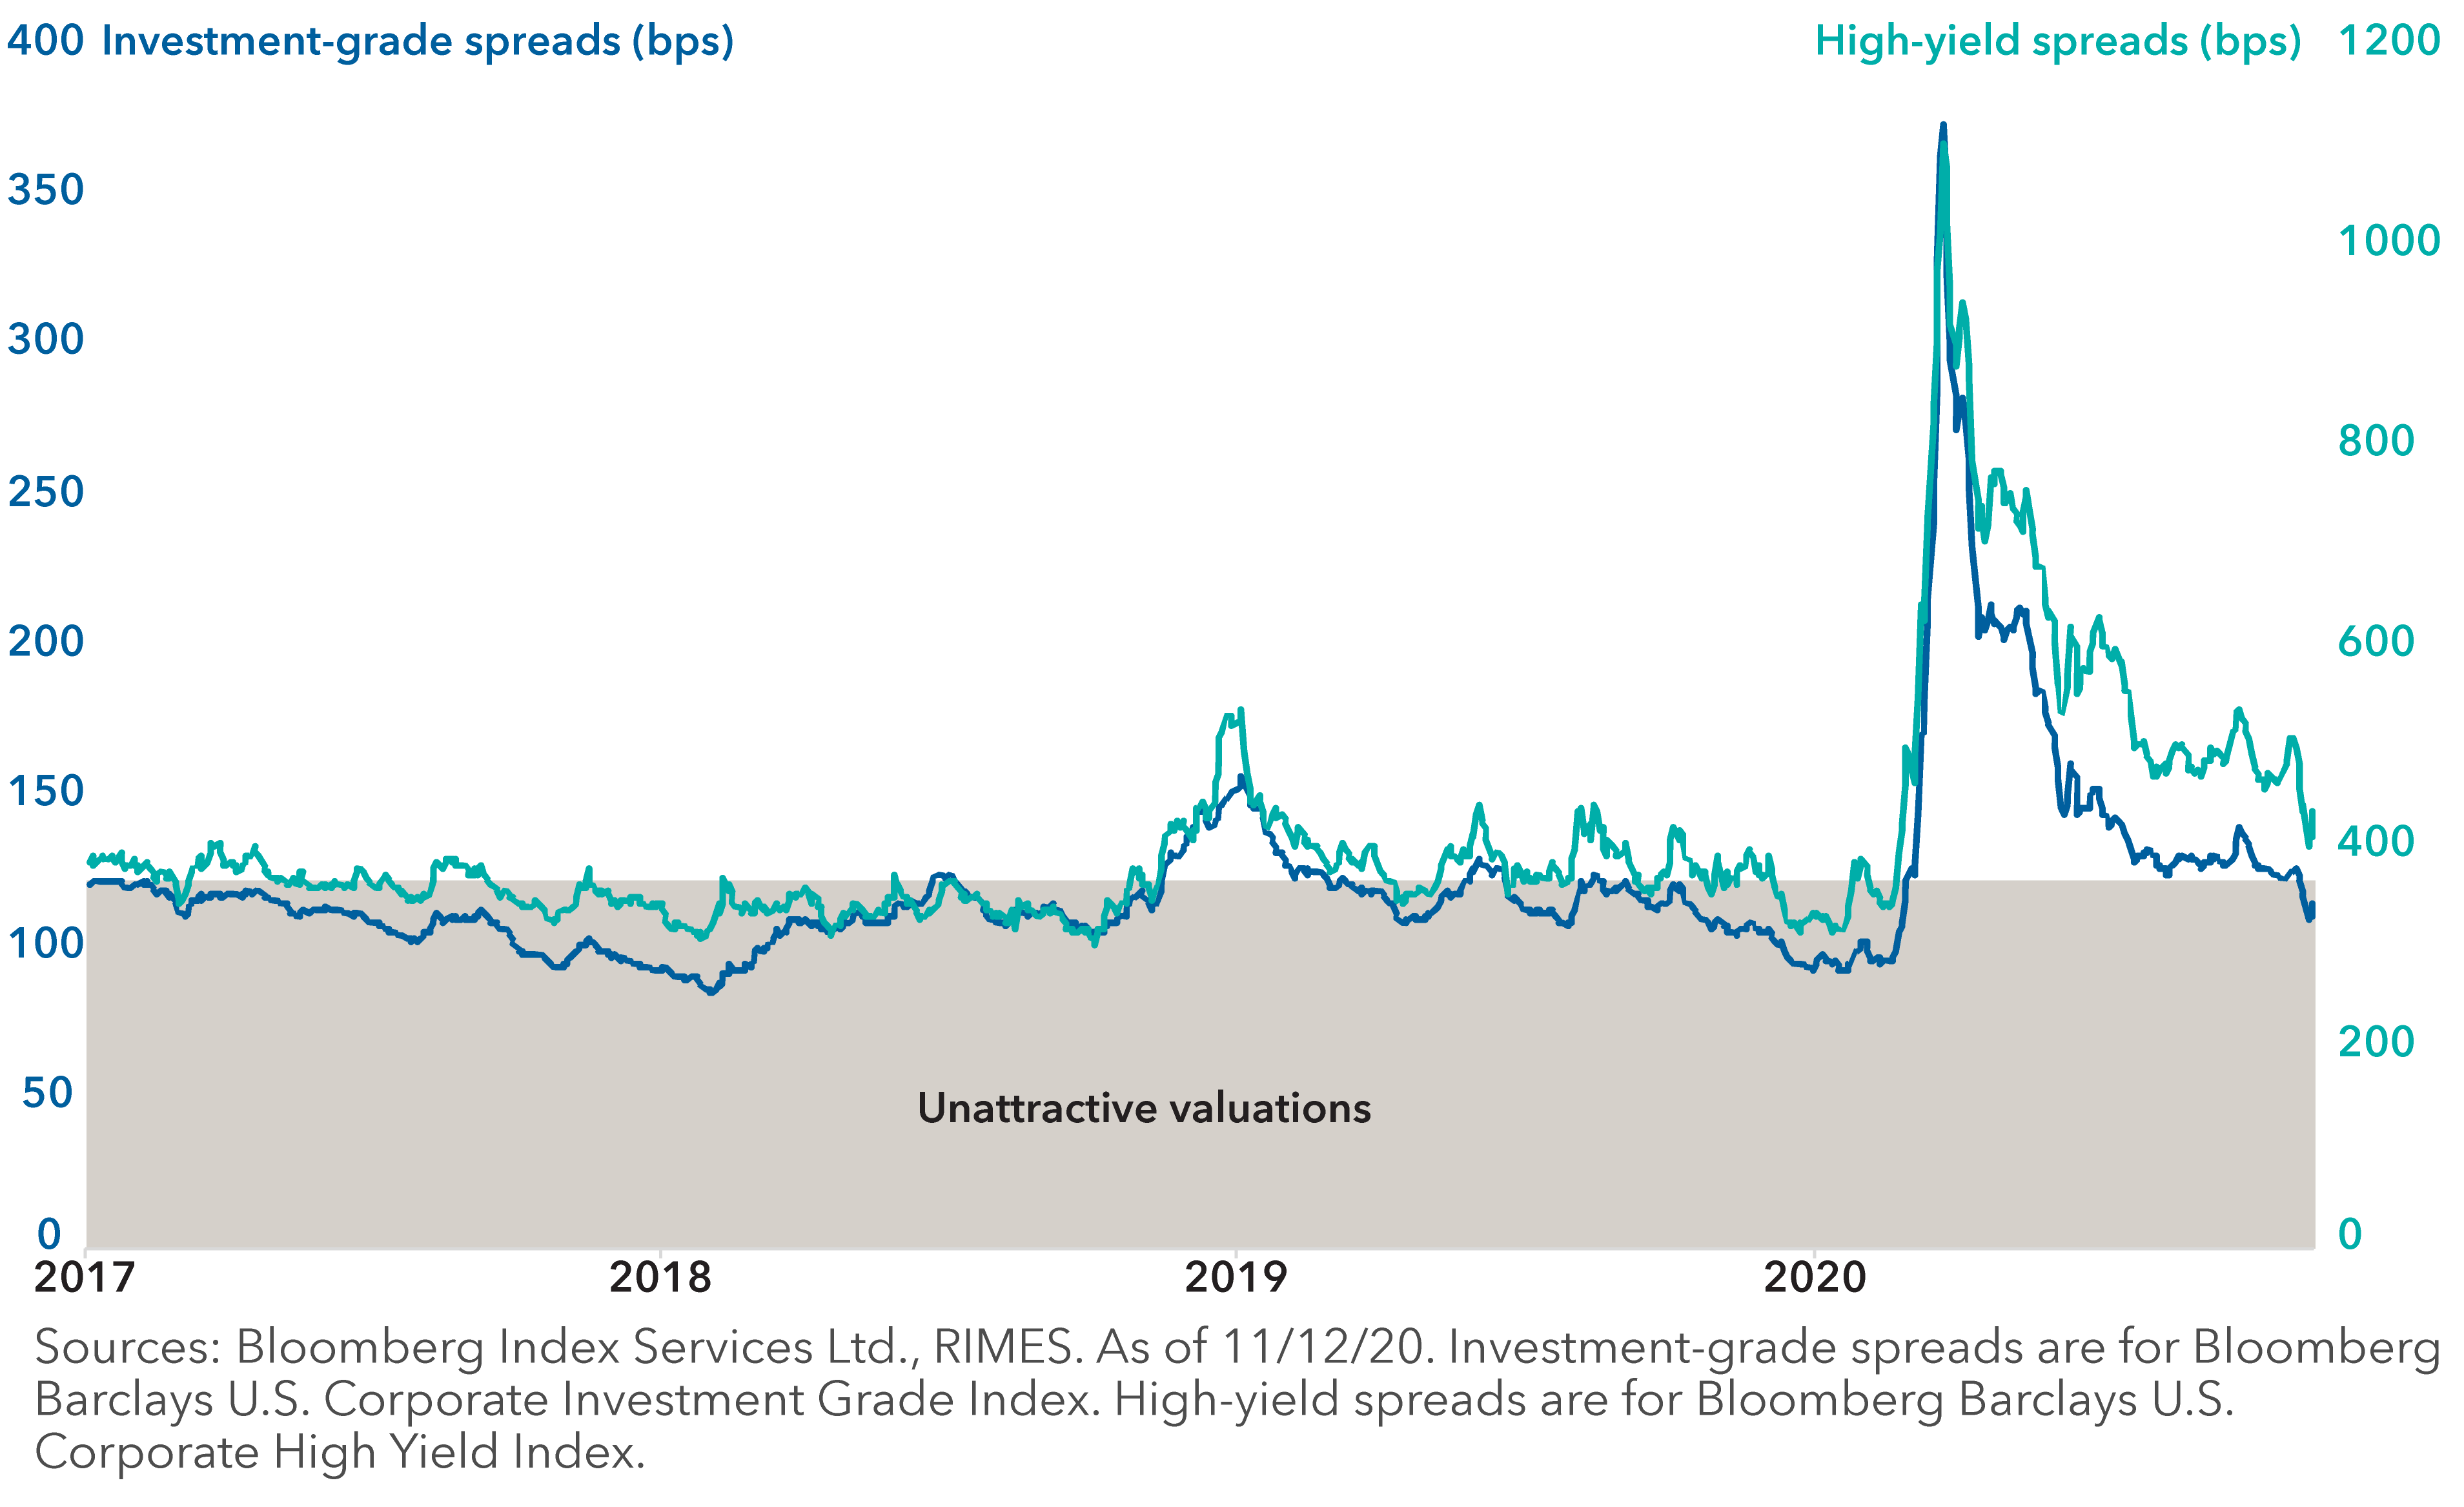 Line graph showing investment-grade and high-yield spreads since 2017.  Spreads for both spiked in March 2020, reaching a high of 373 bps for investment-grade spreads and 1,100 bps for high-yield spreads, before tightening. While investment-grade spreads are approaching pre-pandemic levels, high-yield spreads remain somewhat attractive. Sources: Bloomberg Index Services Ltd., RIMES. As of 11/12/20. Investment-grade spreads are for Bloomberg Barclays U.S. Corporate Investment Grade Index. High-yield spreads are for Bloomberg Barclays U.S. Corporate High Yield Index.